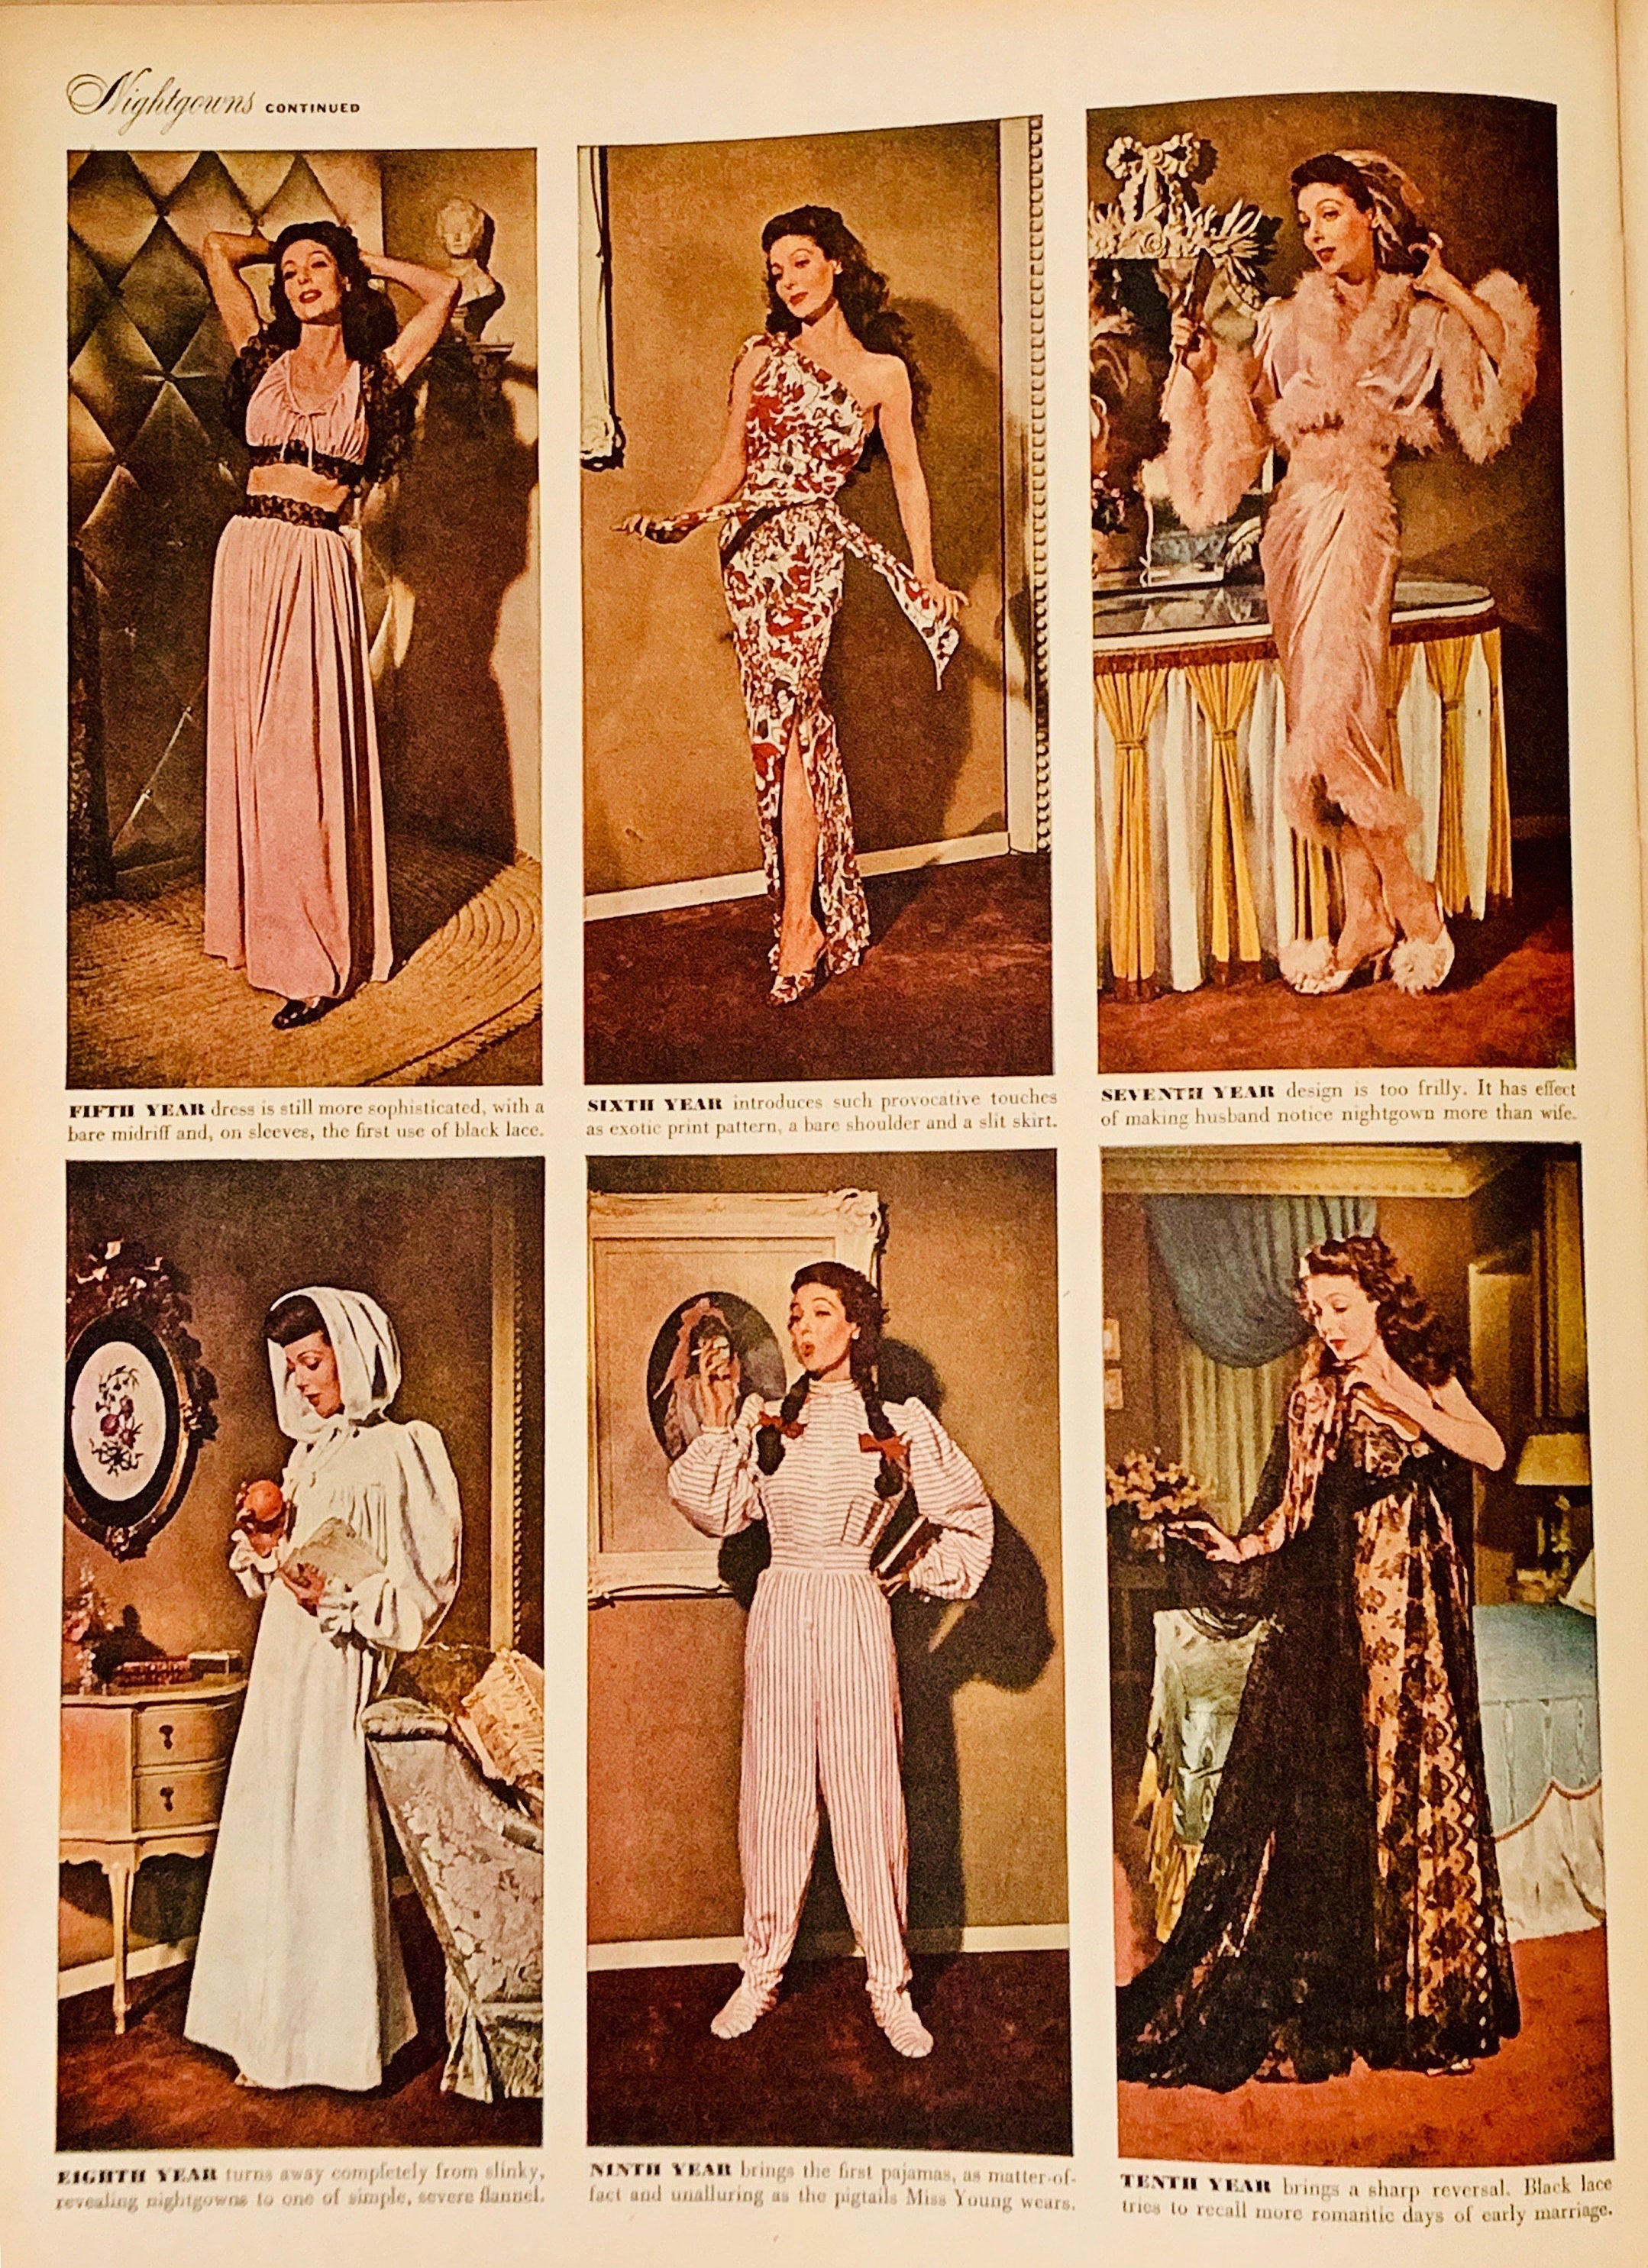 Life Magazine August 12, 1946 "Loretta Young Models A decade of Nightgowns & Pajamas" Vintage Reading Photography Fashion Style Collectible